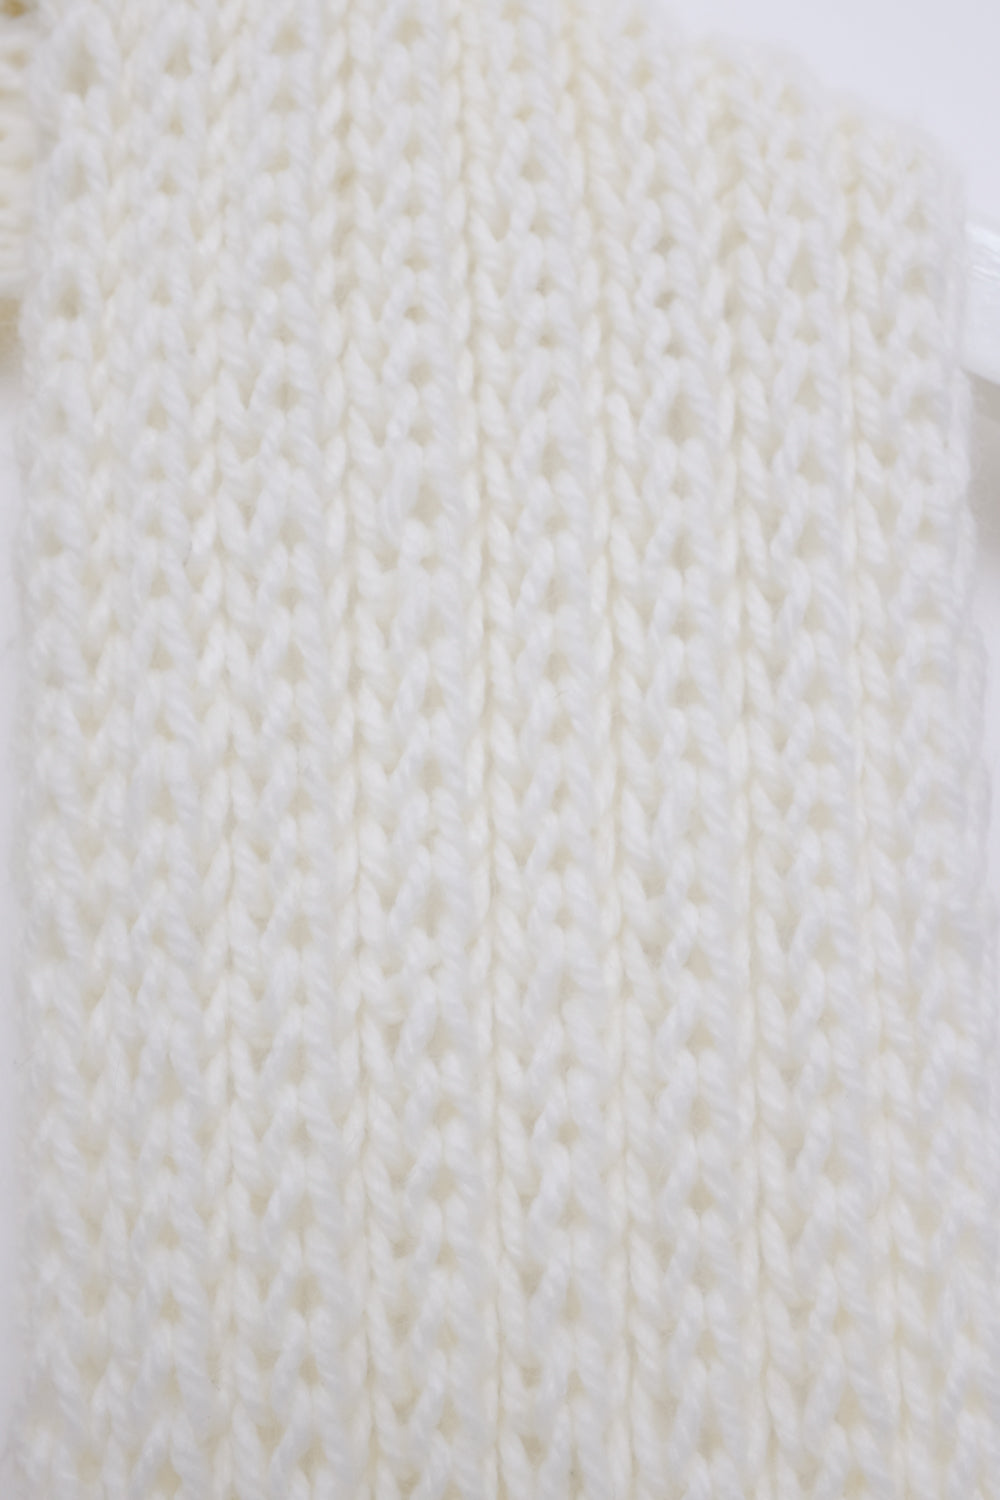 HANDMADE OFF WHITE CHUNKY KNIT SCARF